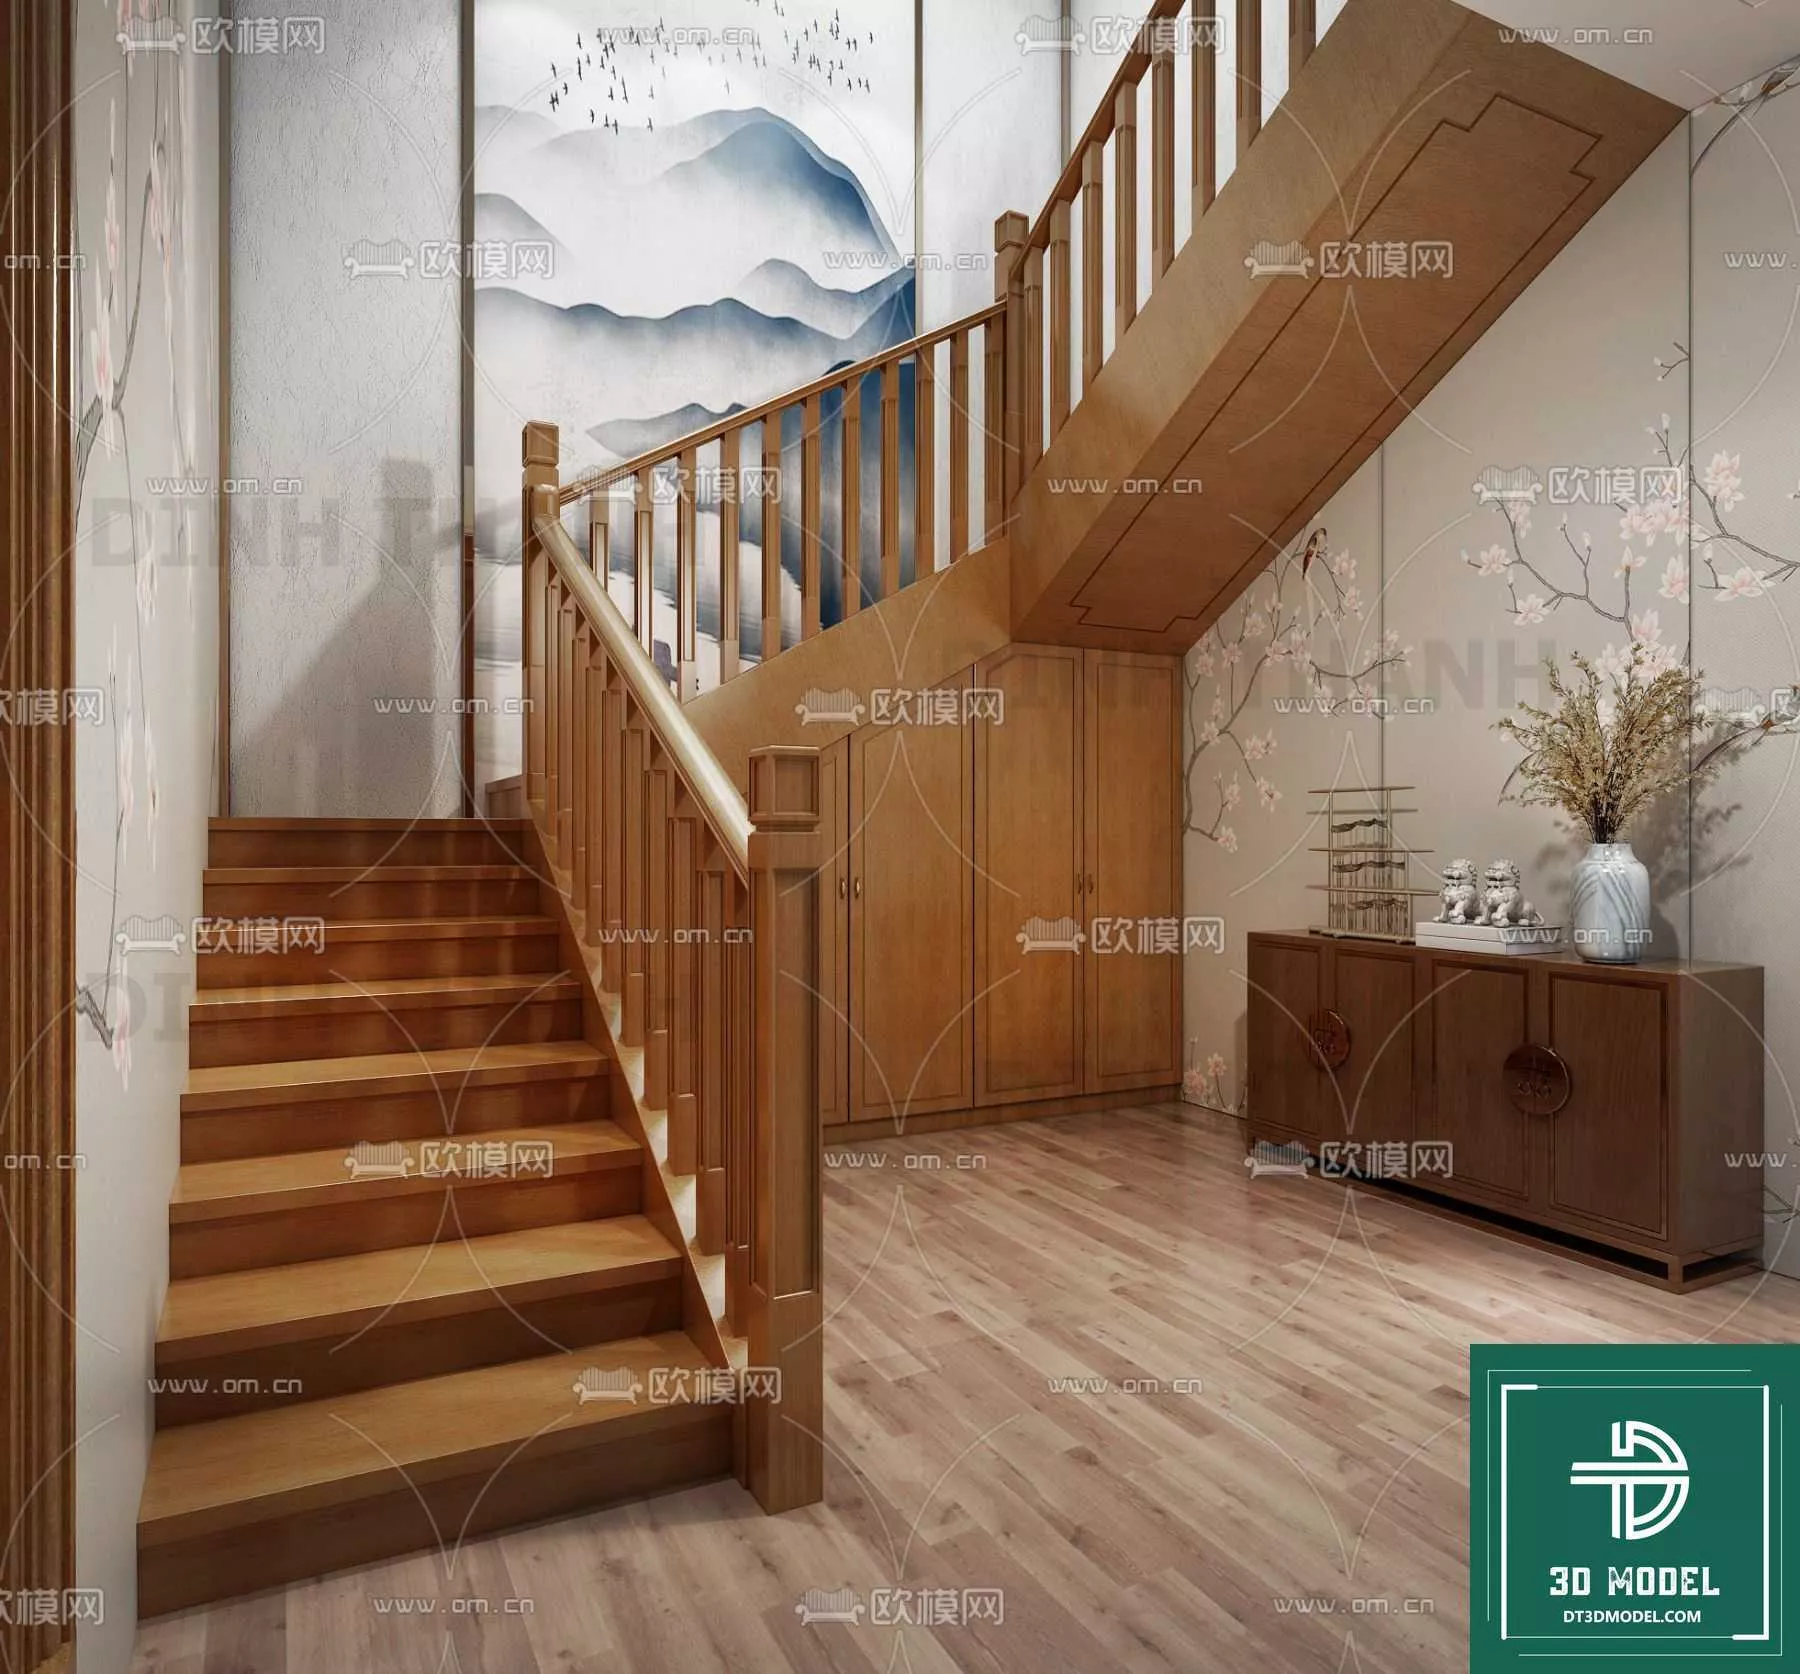 MODERN STAIR - SKETCHUP 3D MODEL - VRAY OR ENSCAPE - ID14153